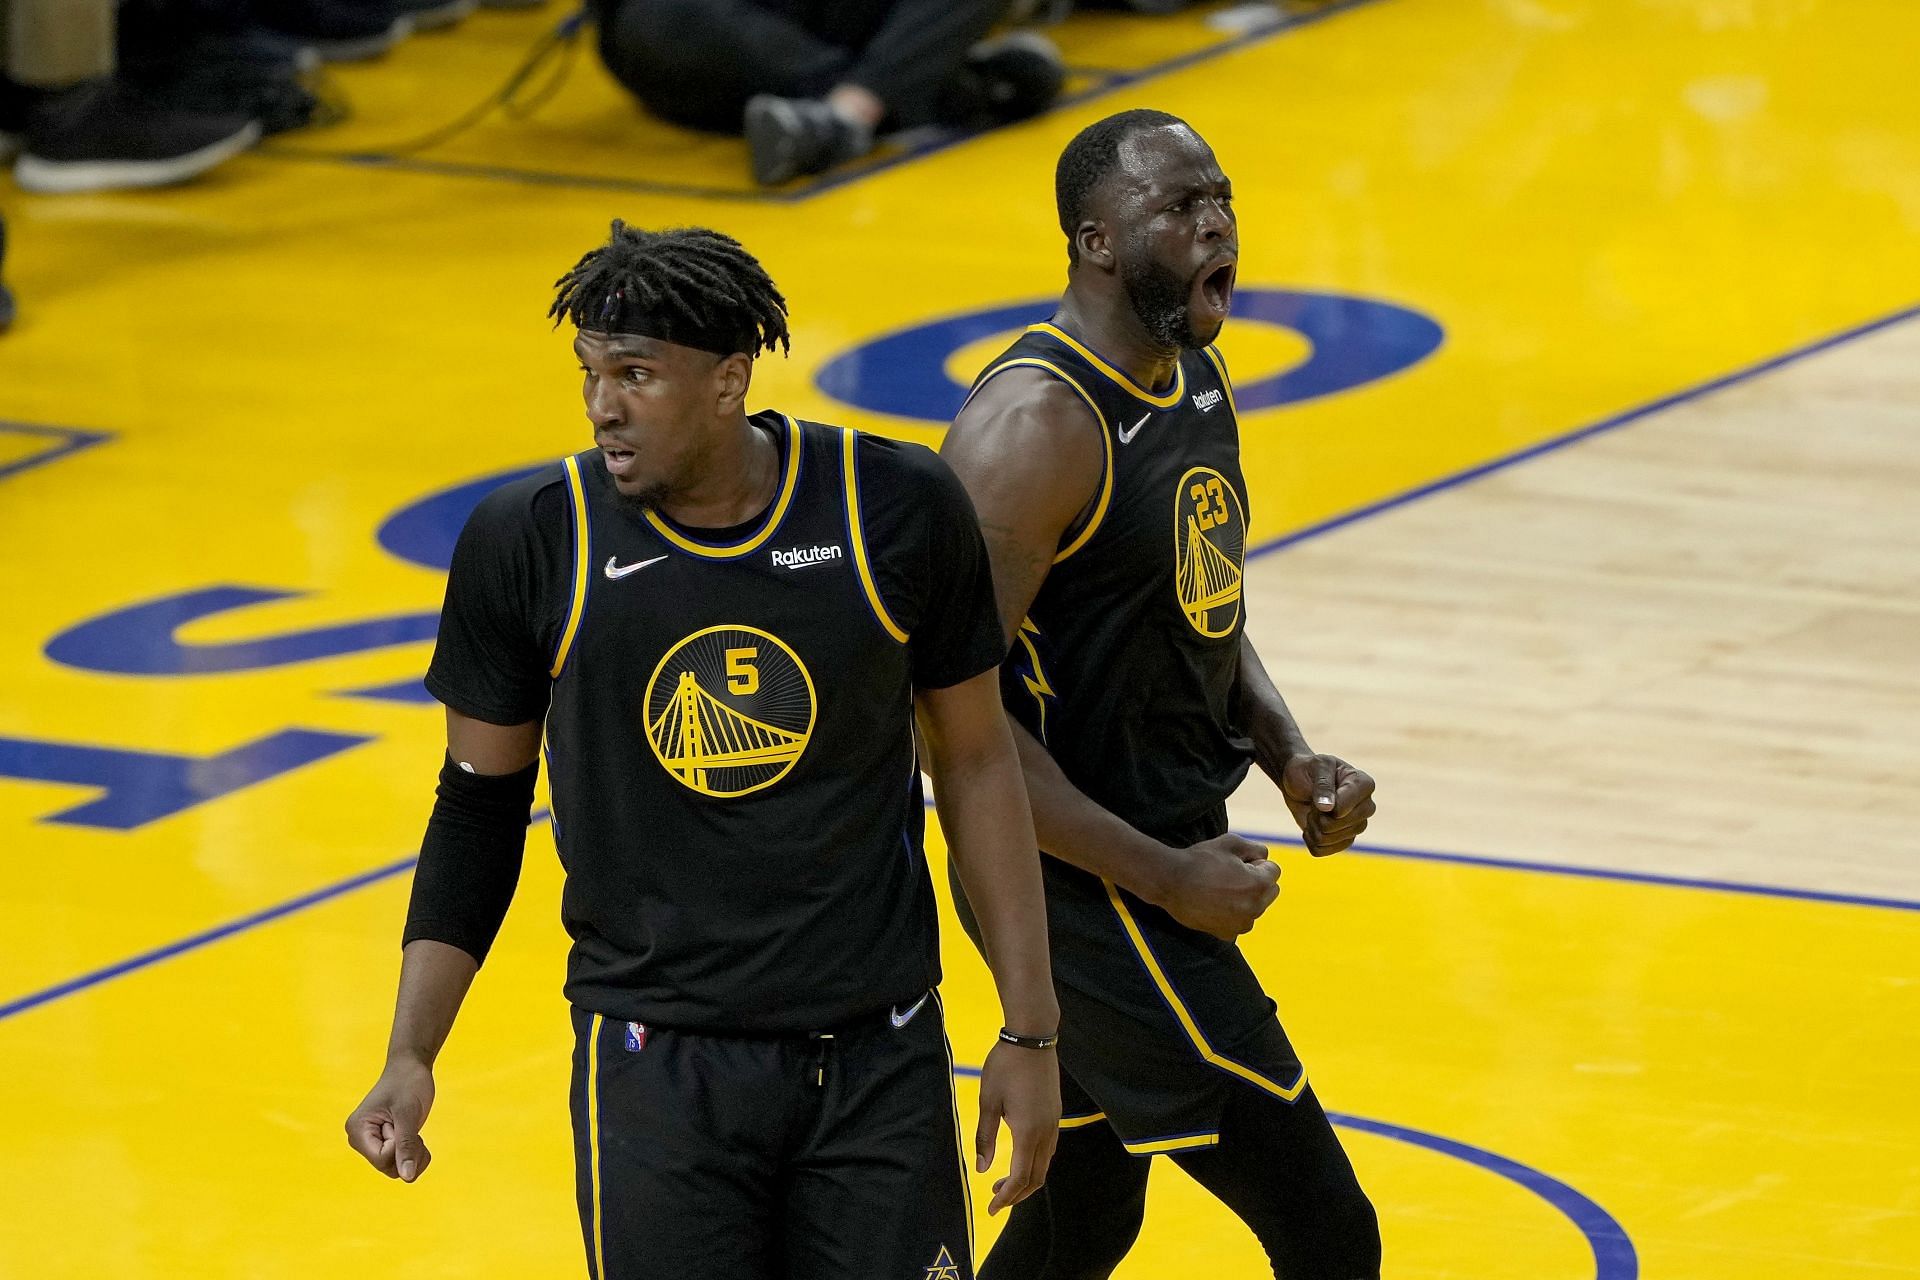 Kevon Looney made his presence felt for the Golden State Warriors in Game 1, while Luka Doncic badly struggled for the Dallas Mavericks.